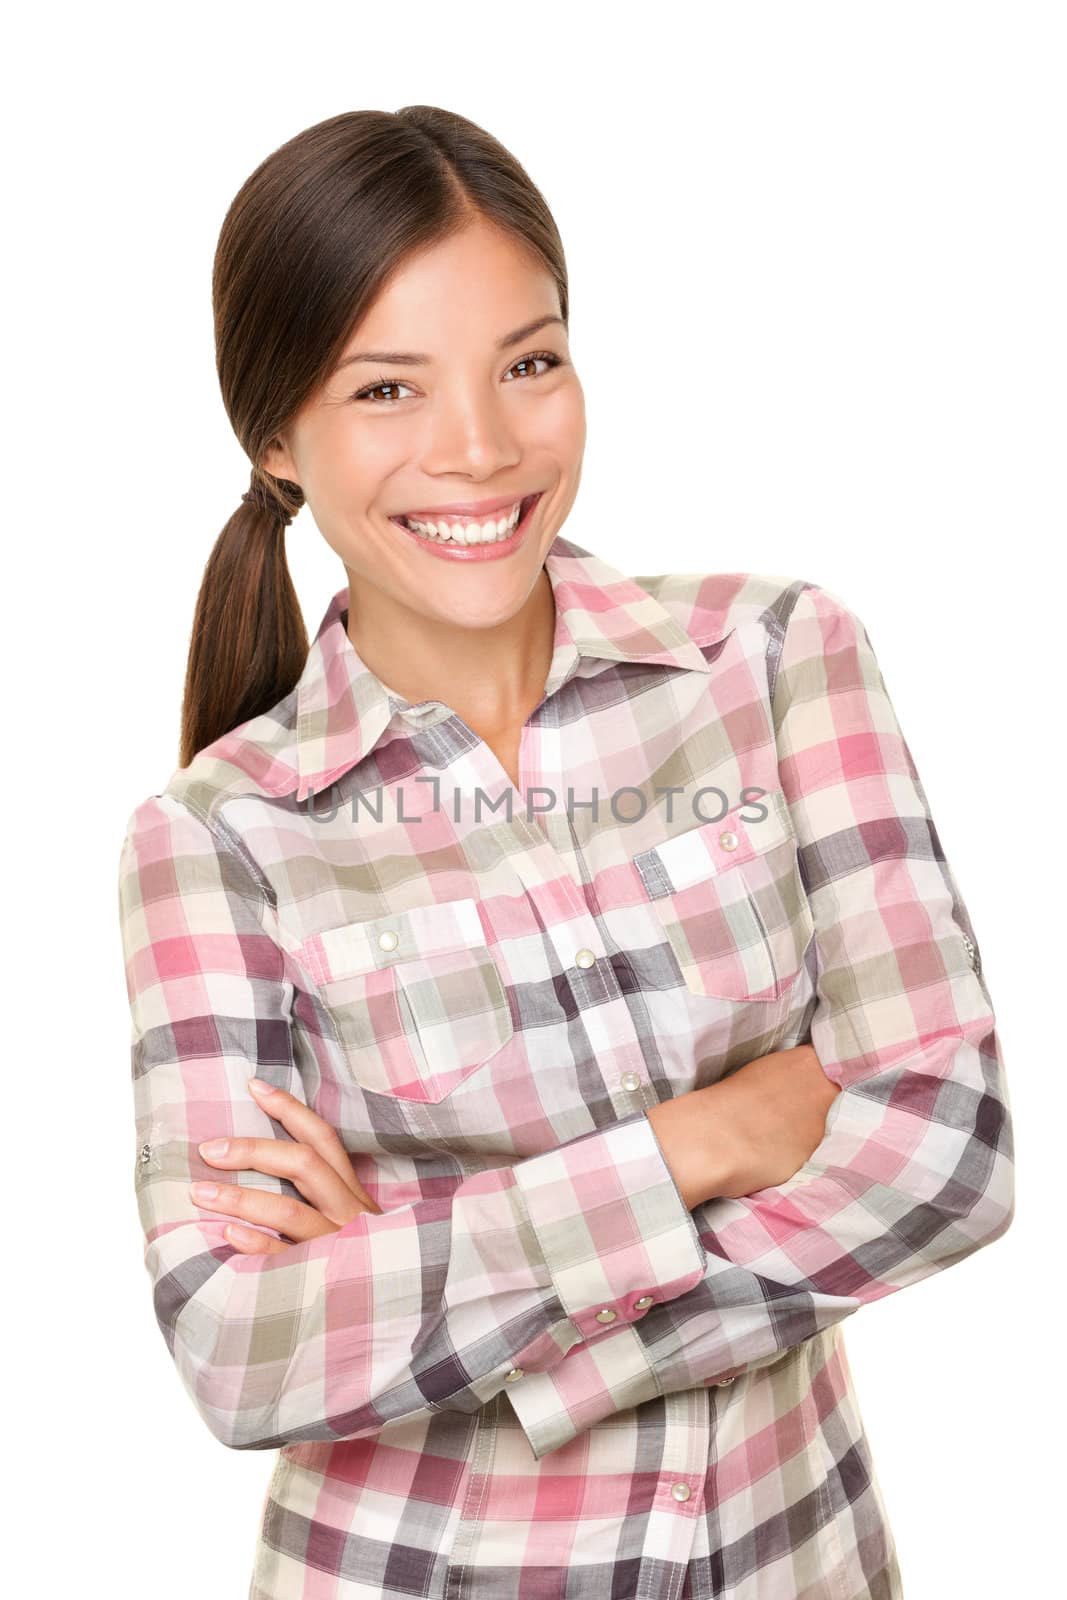 Smiling woman. Fresh outdoors type in cute lumberjack plaid shirt isolated on white background in studio. Happy beautiful mixed race Asian Caucasian female model.